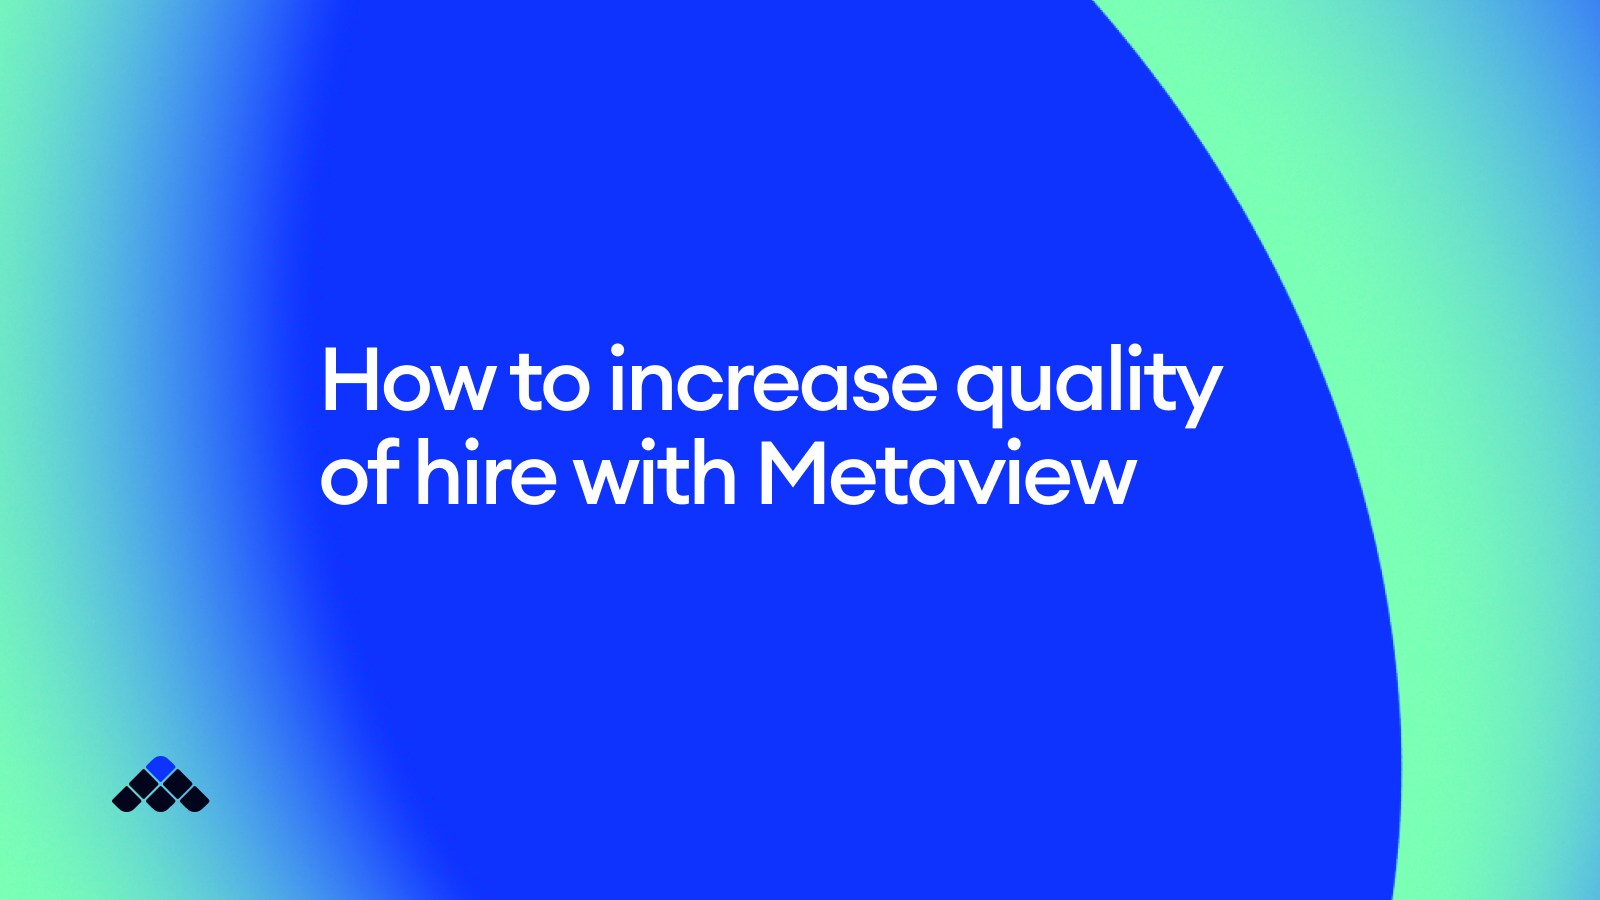 How to increase quality of hire with Metaview